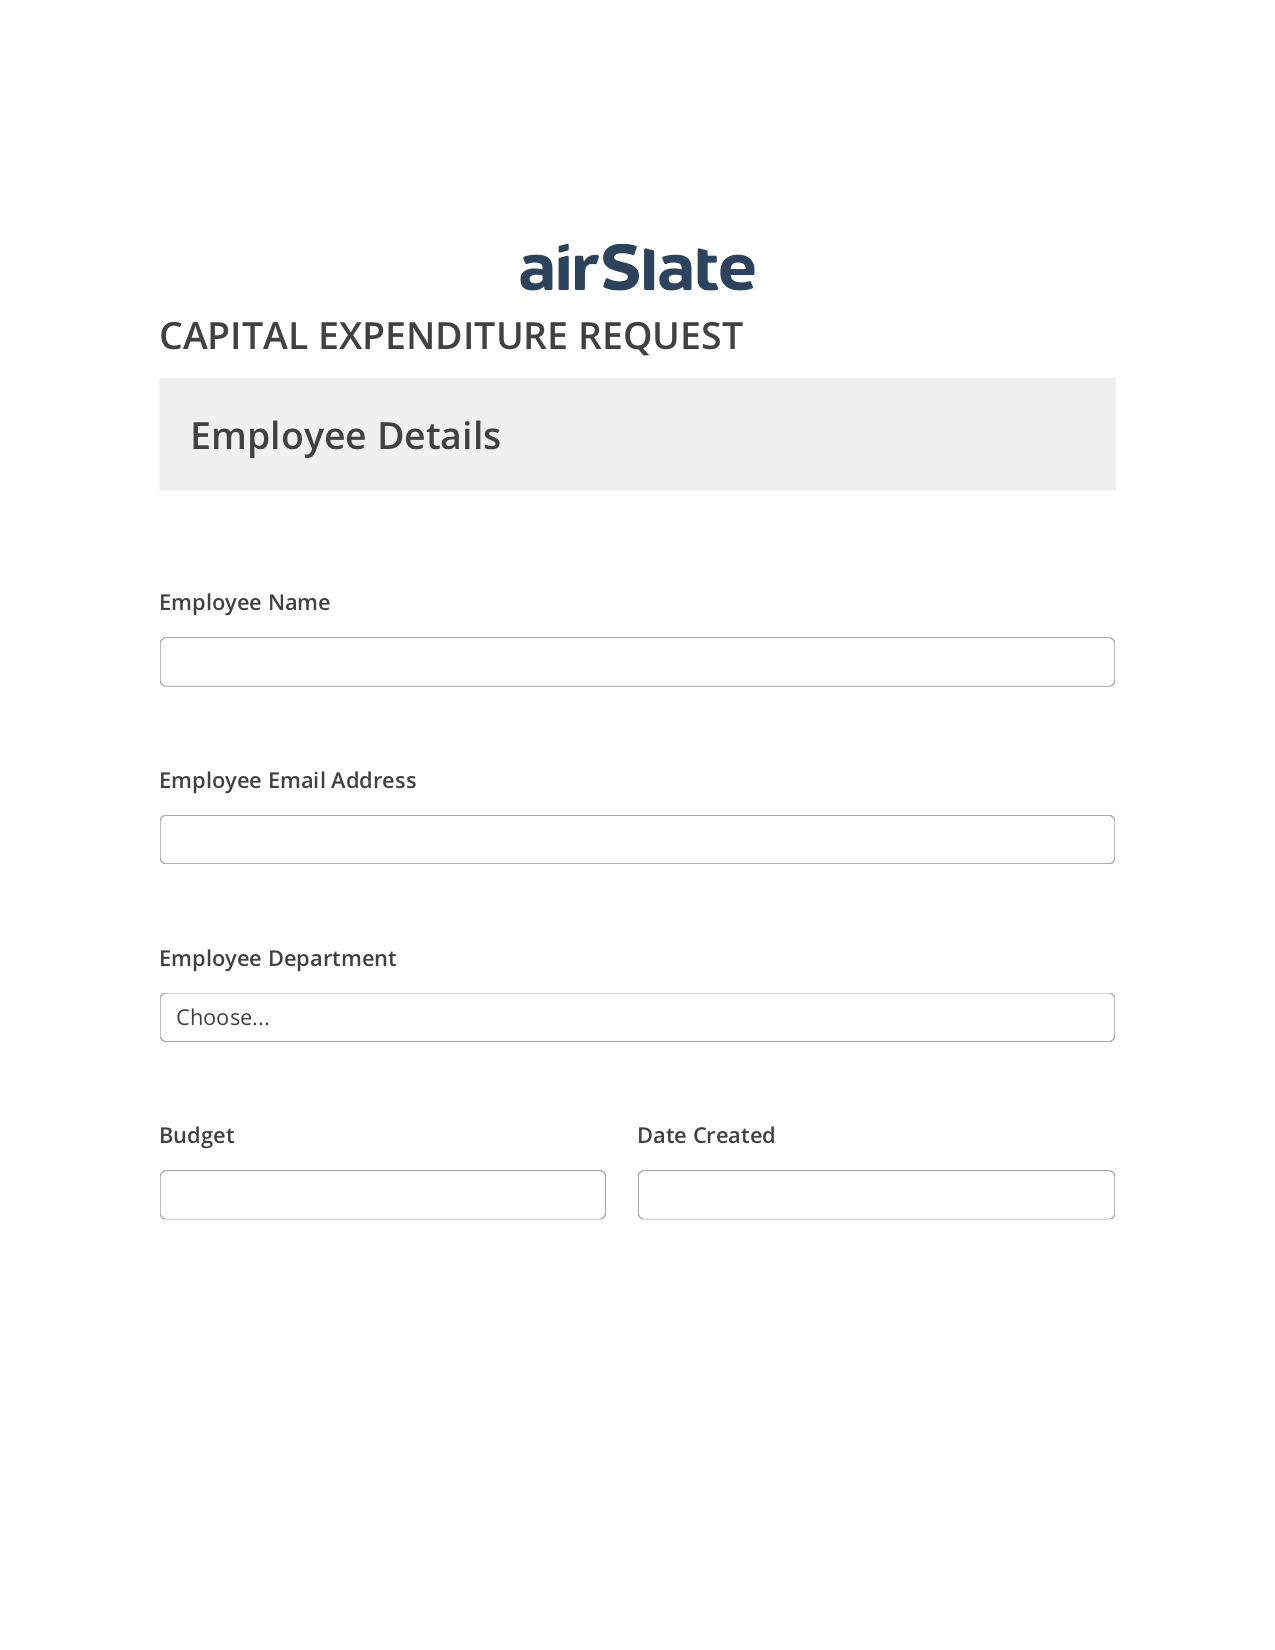 Capital Expenditure Request Approval Workflow System Bot - Slack Two-Way Binding Bot, Email Notification Bot, Export to Salesforce